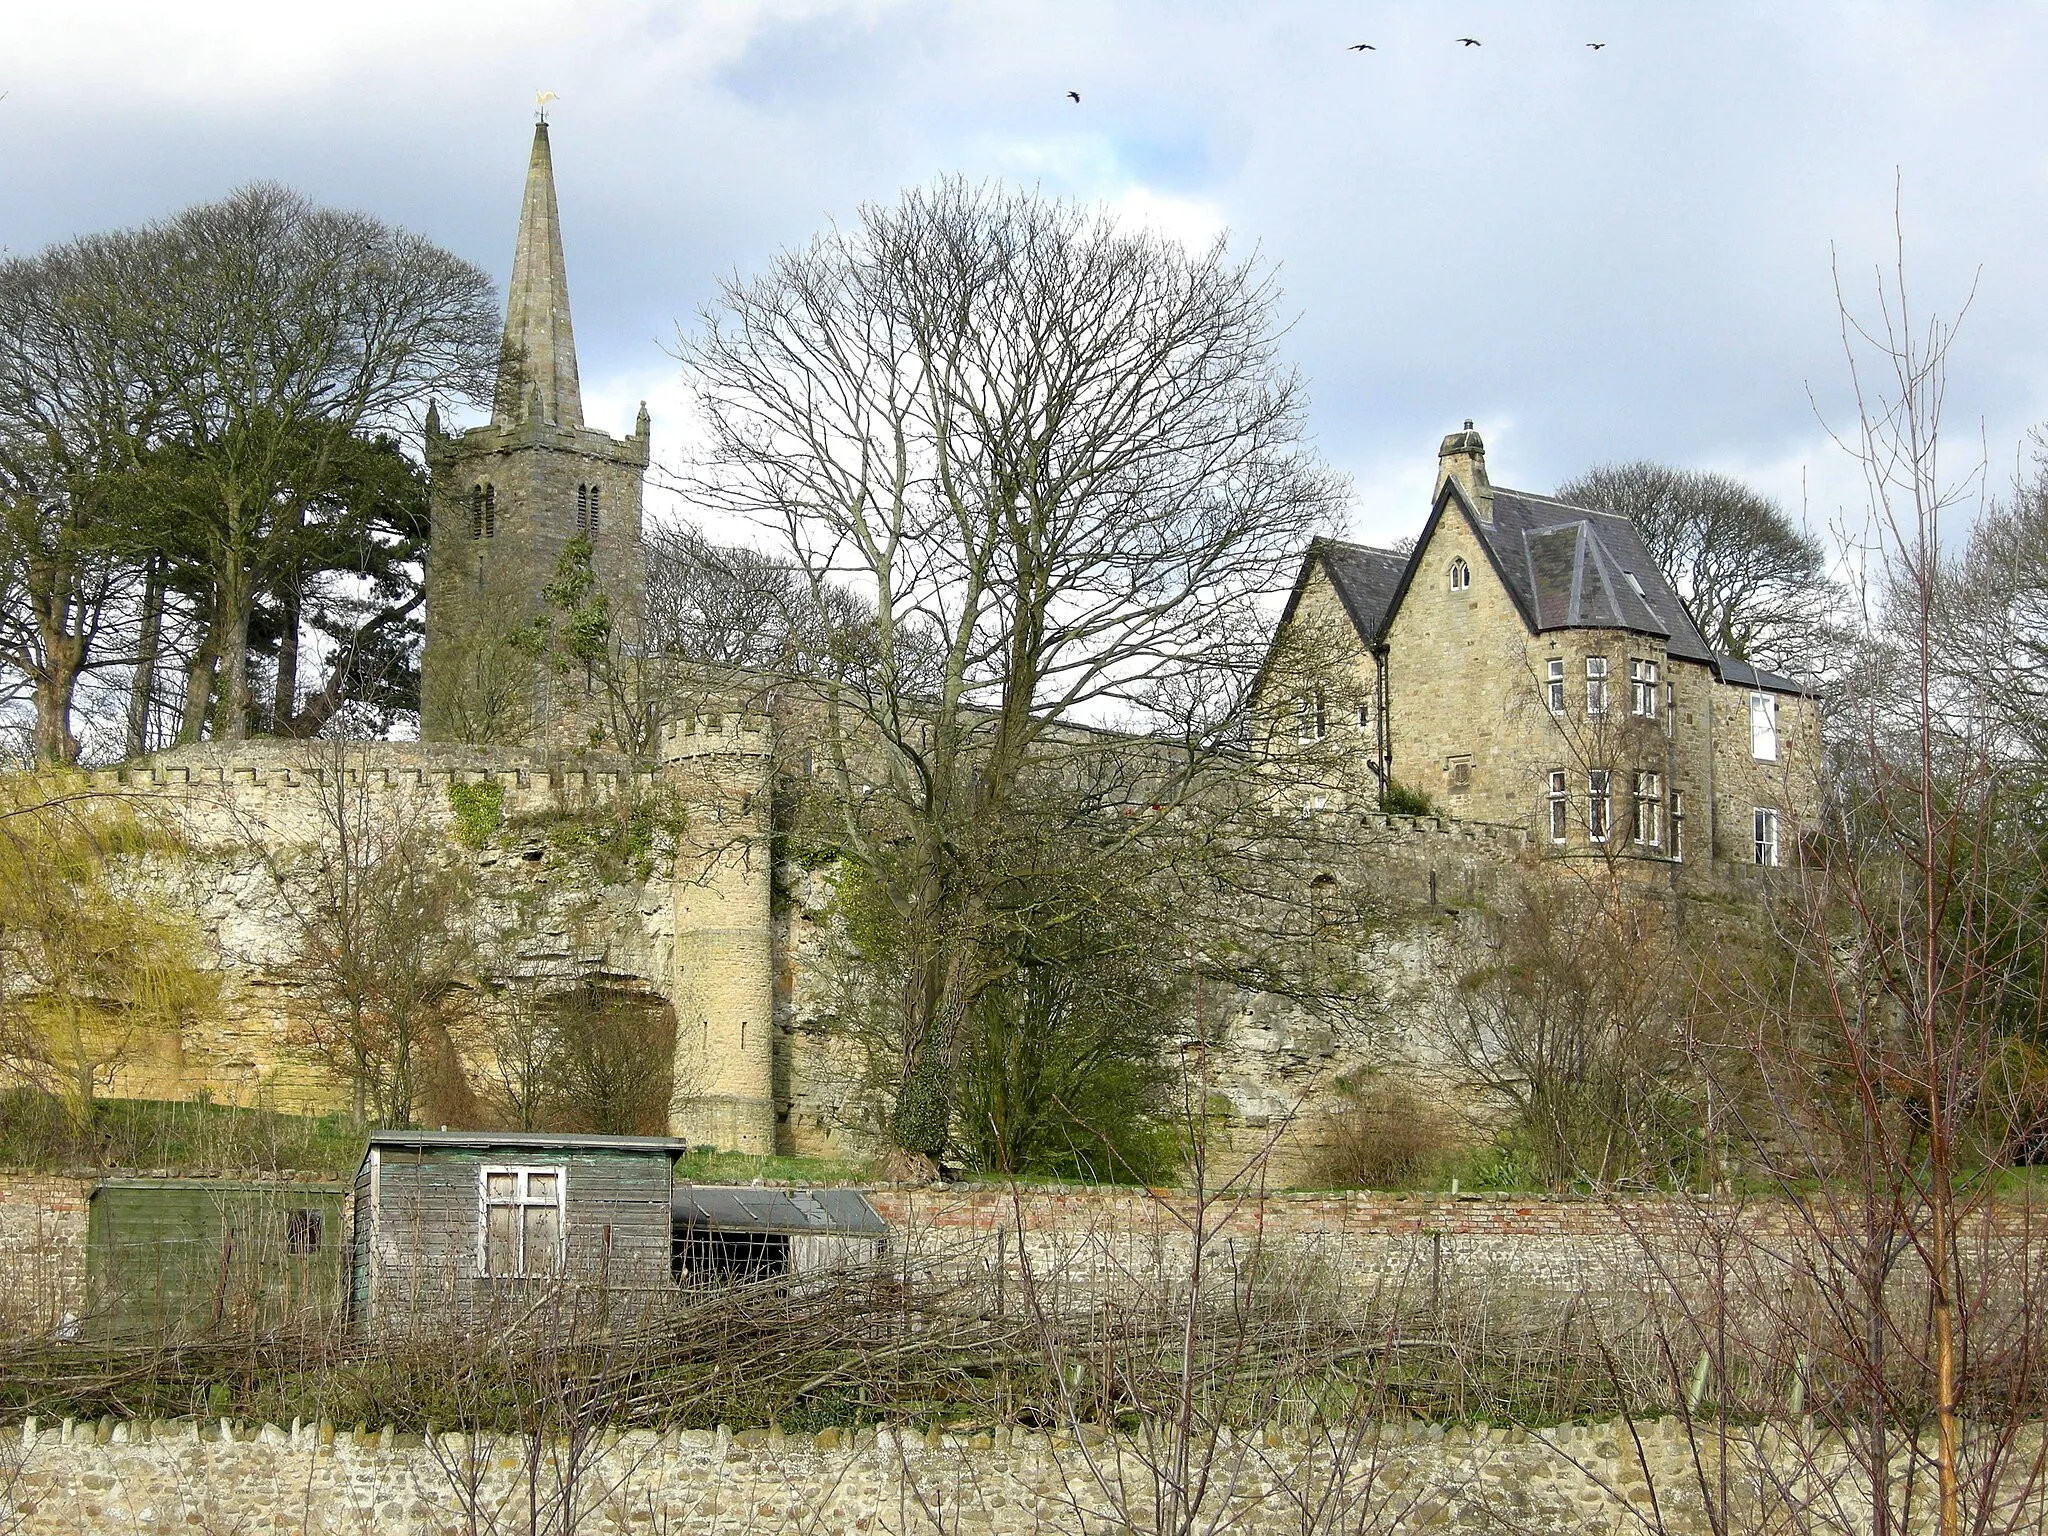 Photo showing: High Coniscliffe, County Durham, England. Showing St Edwin's Church and vicarage on cliff.